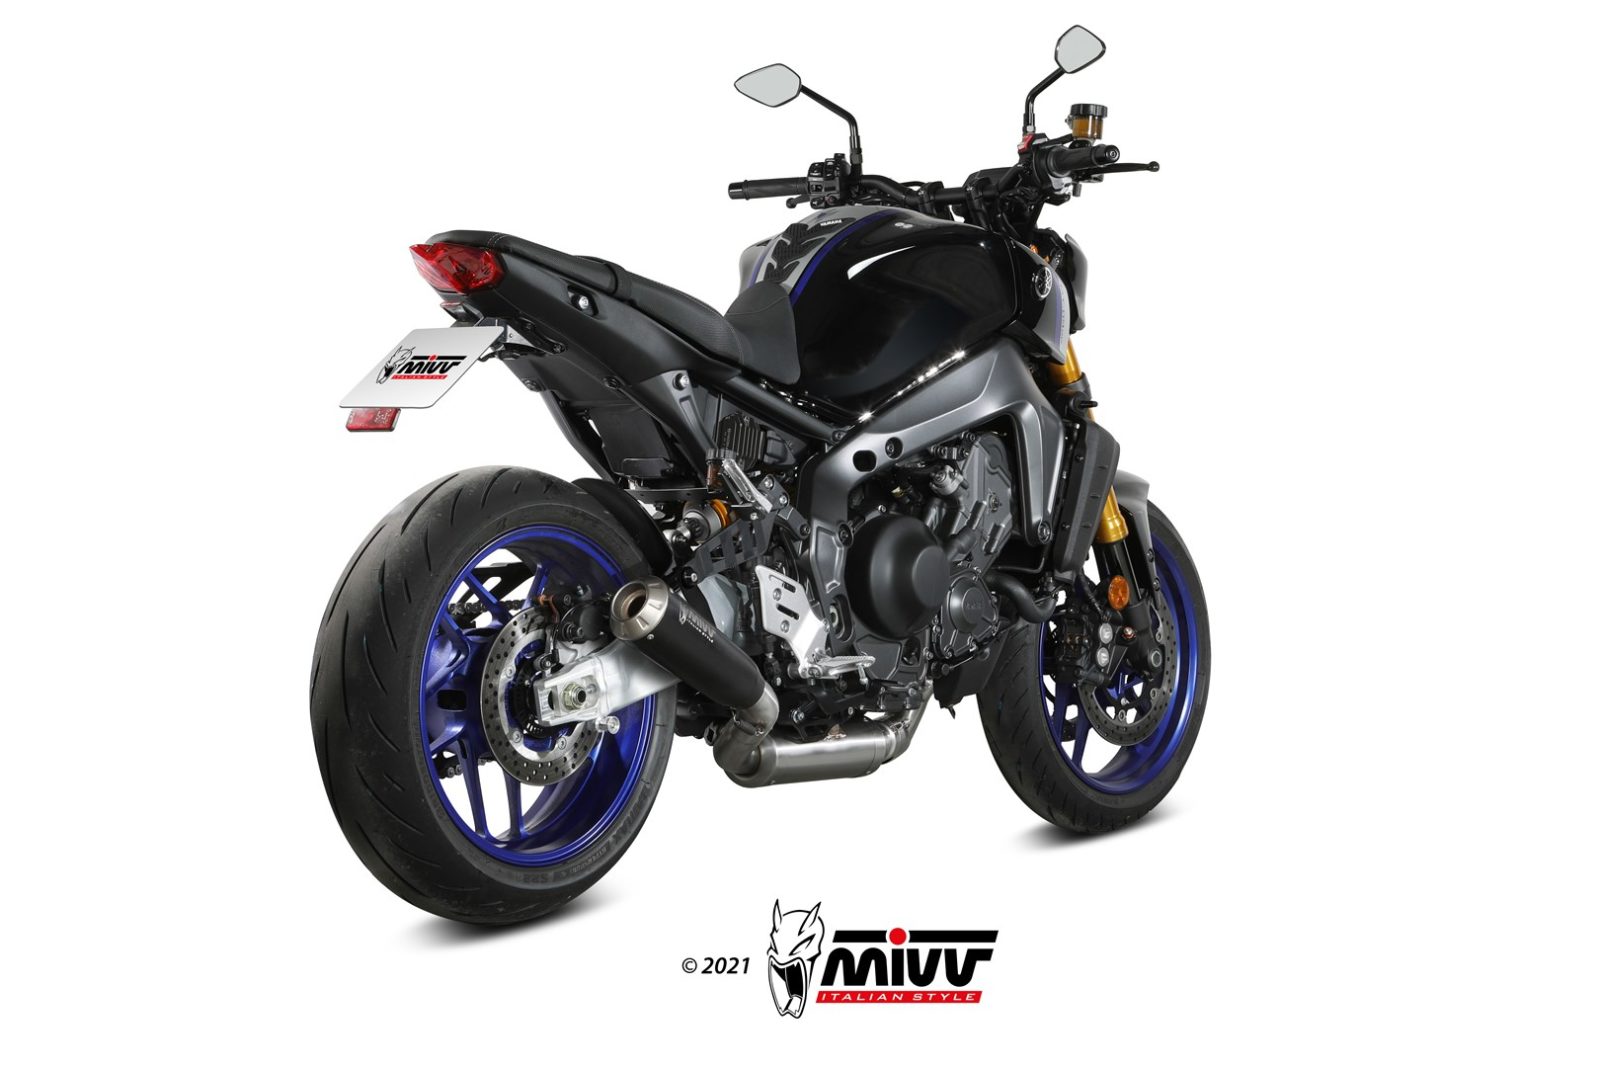 MV Agusta Brutale 1000 RS: All You Need to Know About the 